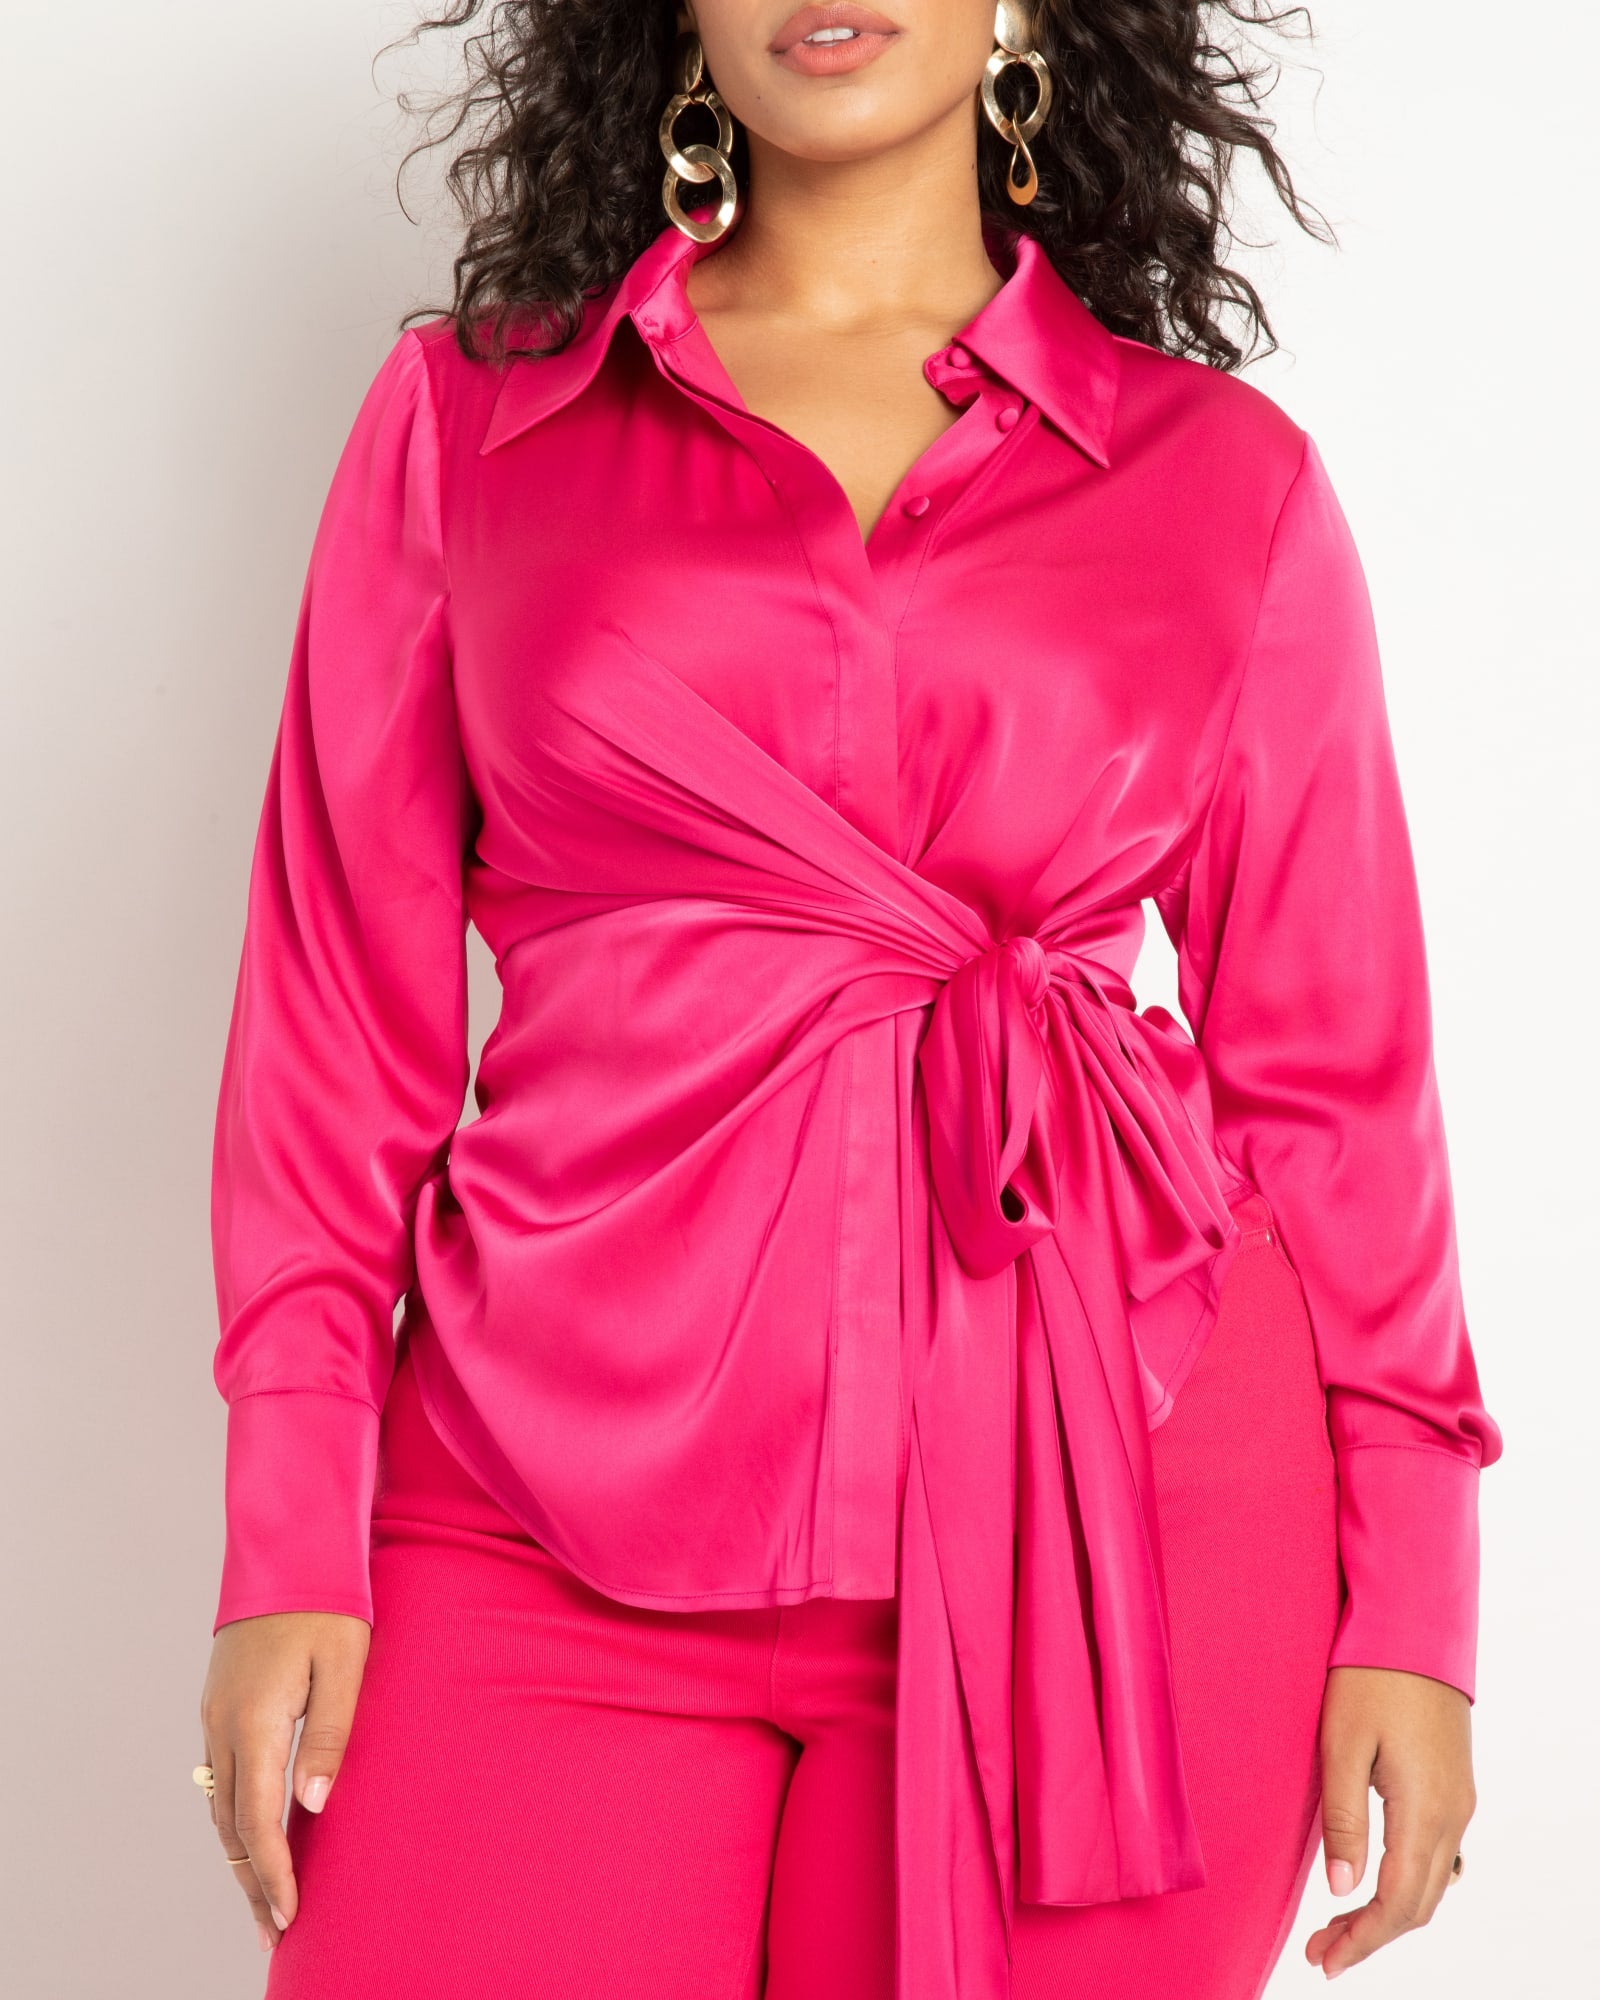 Satin Collared Blouse with Bow | Hot Pink